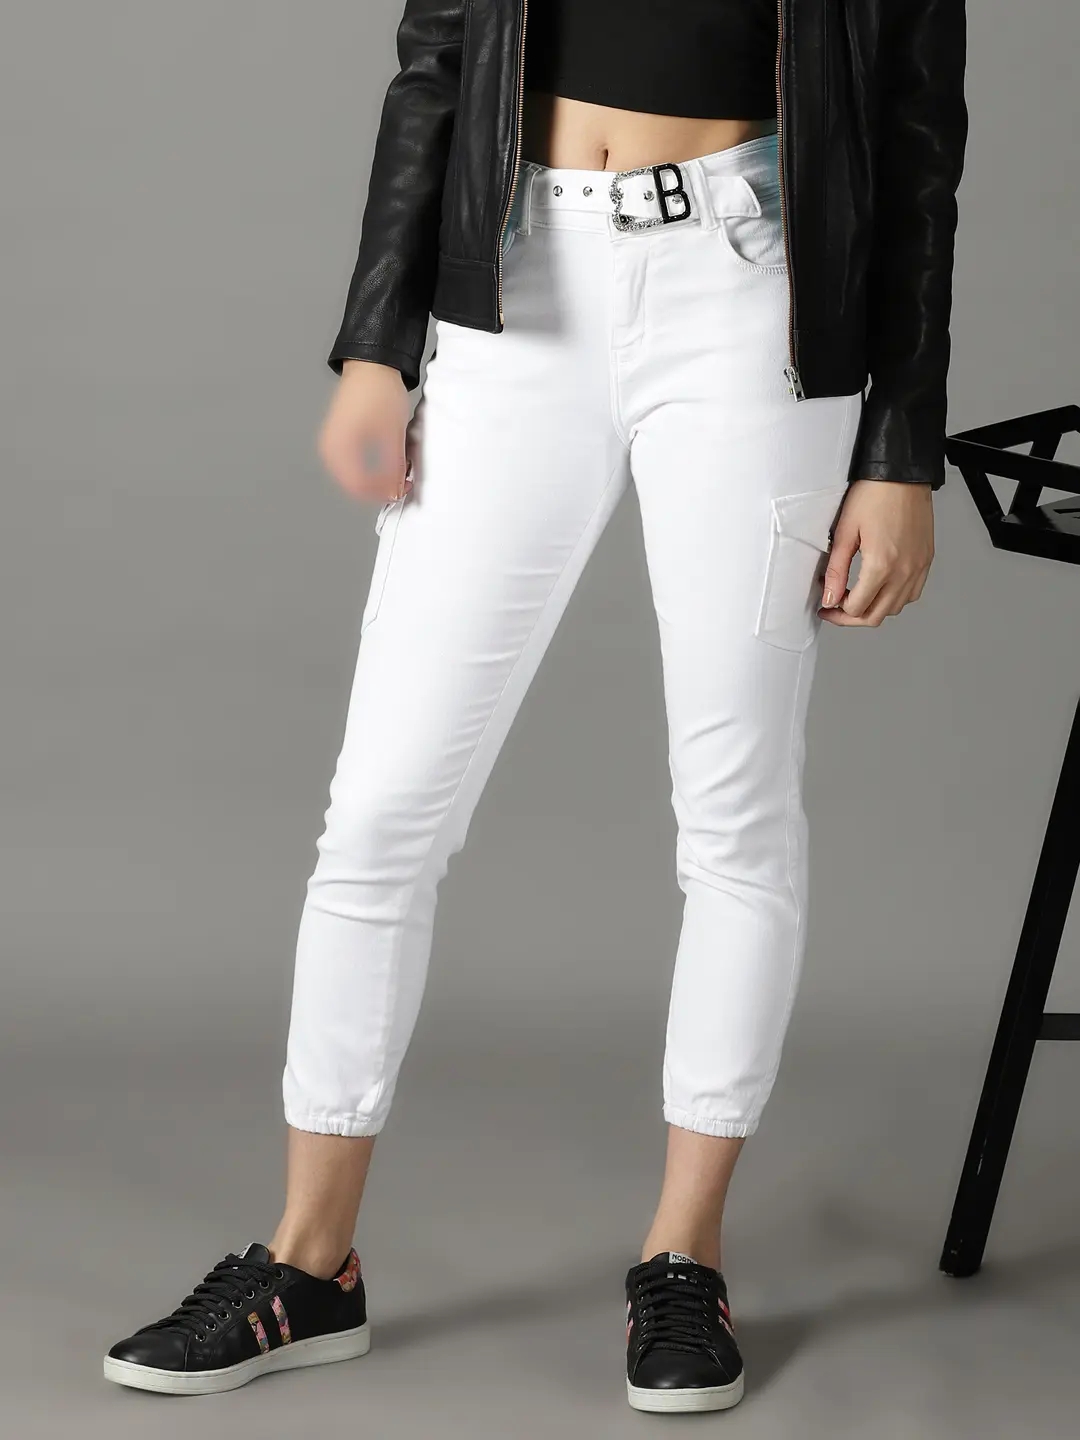 SHOWOFF Women's Stretchable Clean Look White Jogger Jeans